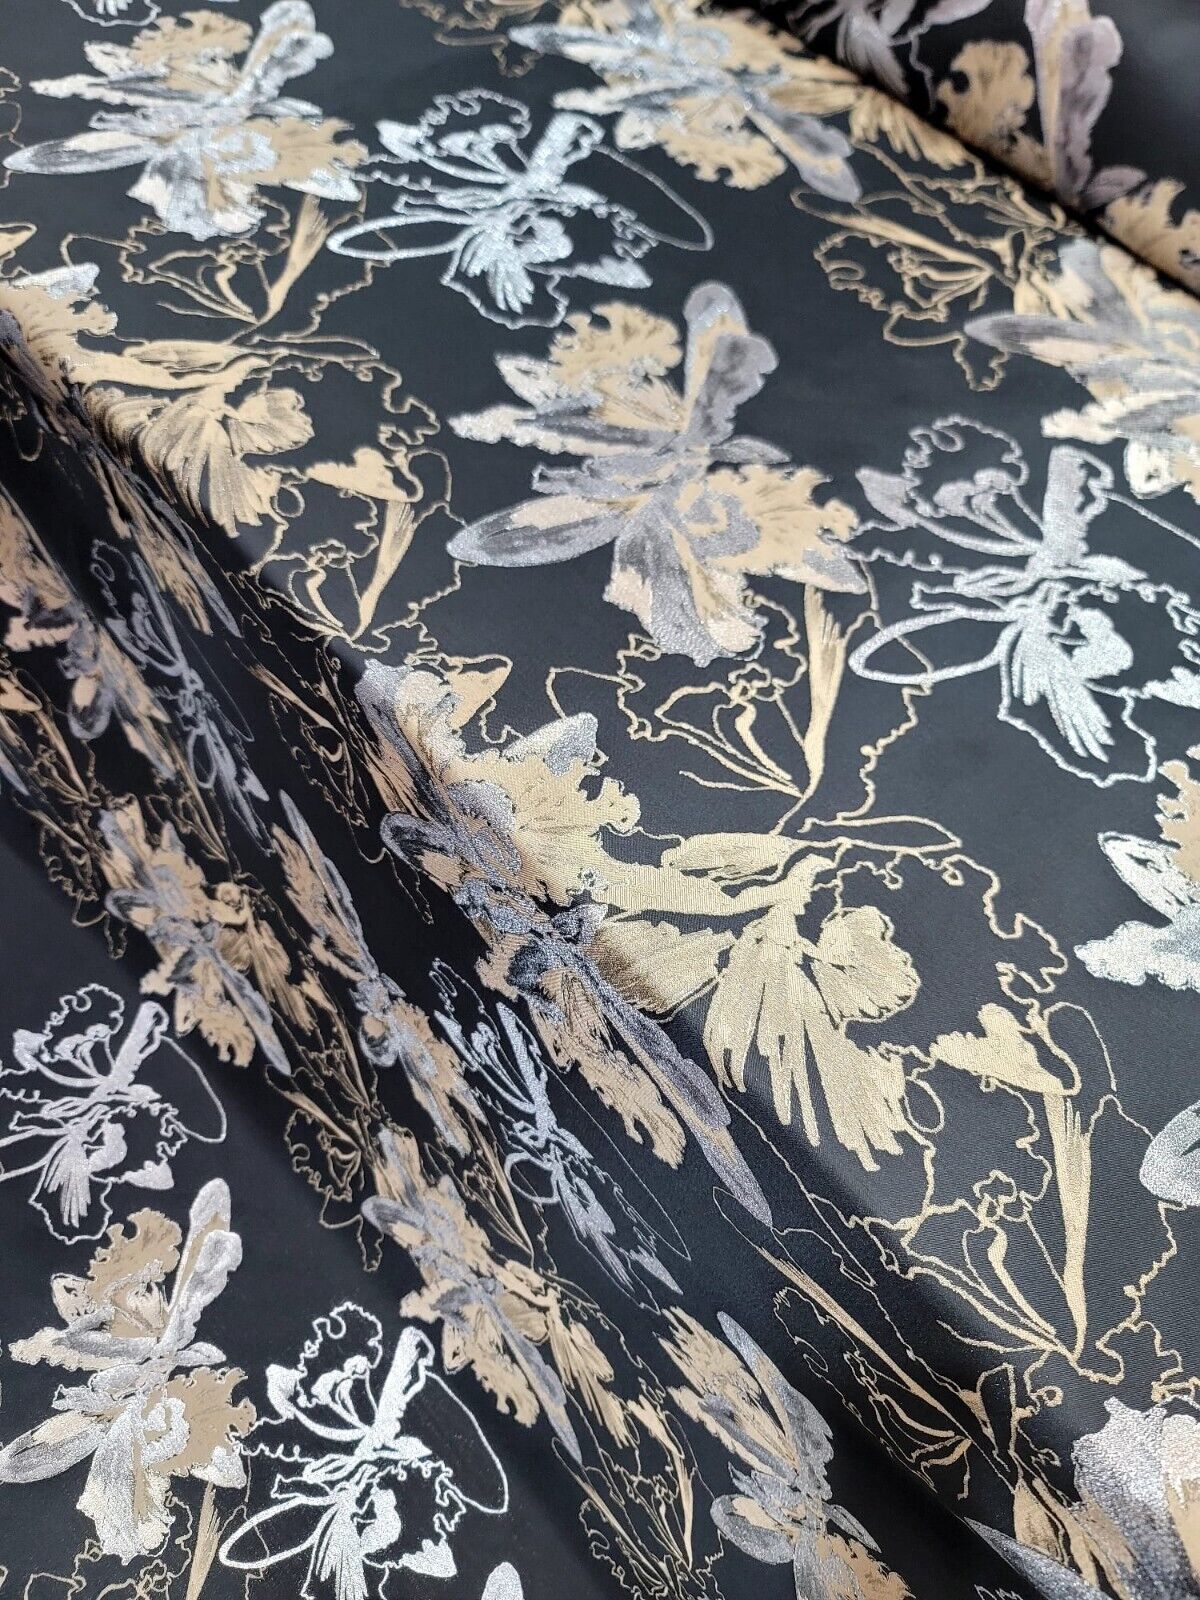 Gold,Silver and Black Damask Jacquard Brocade Floral Fabric - 60" Width